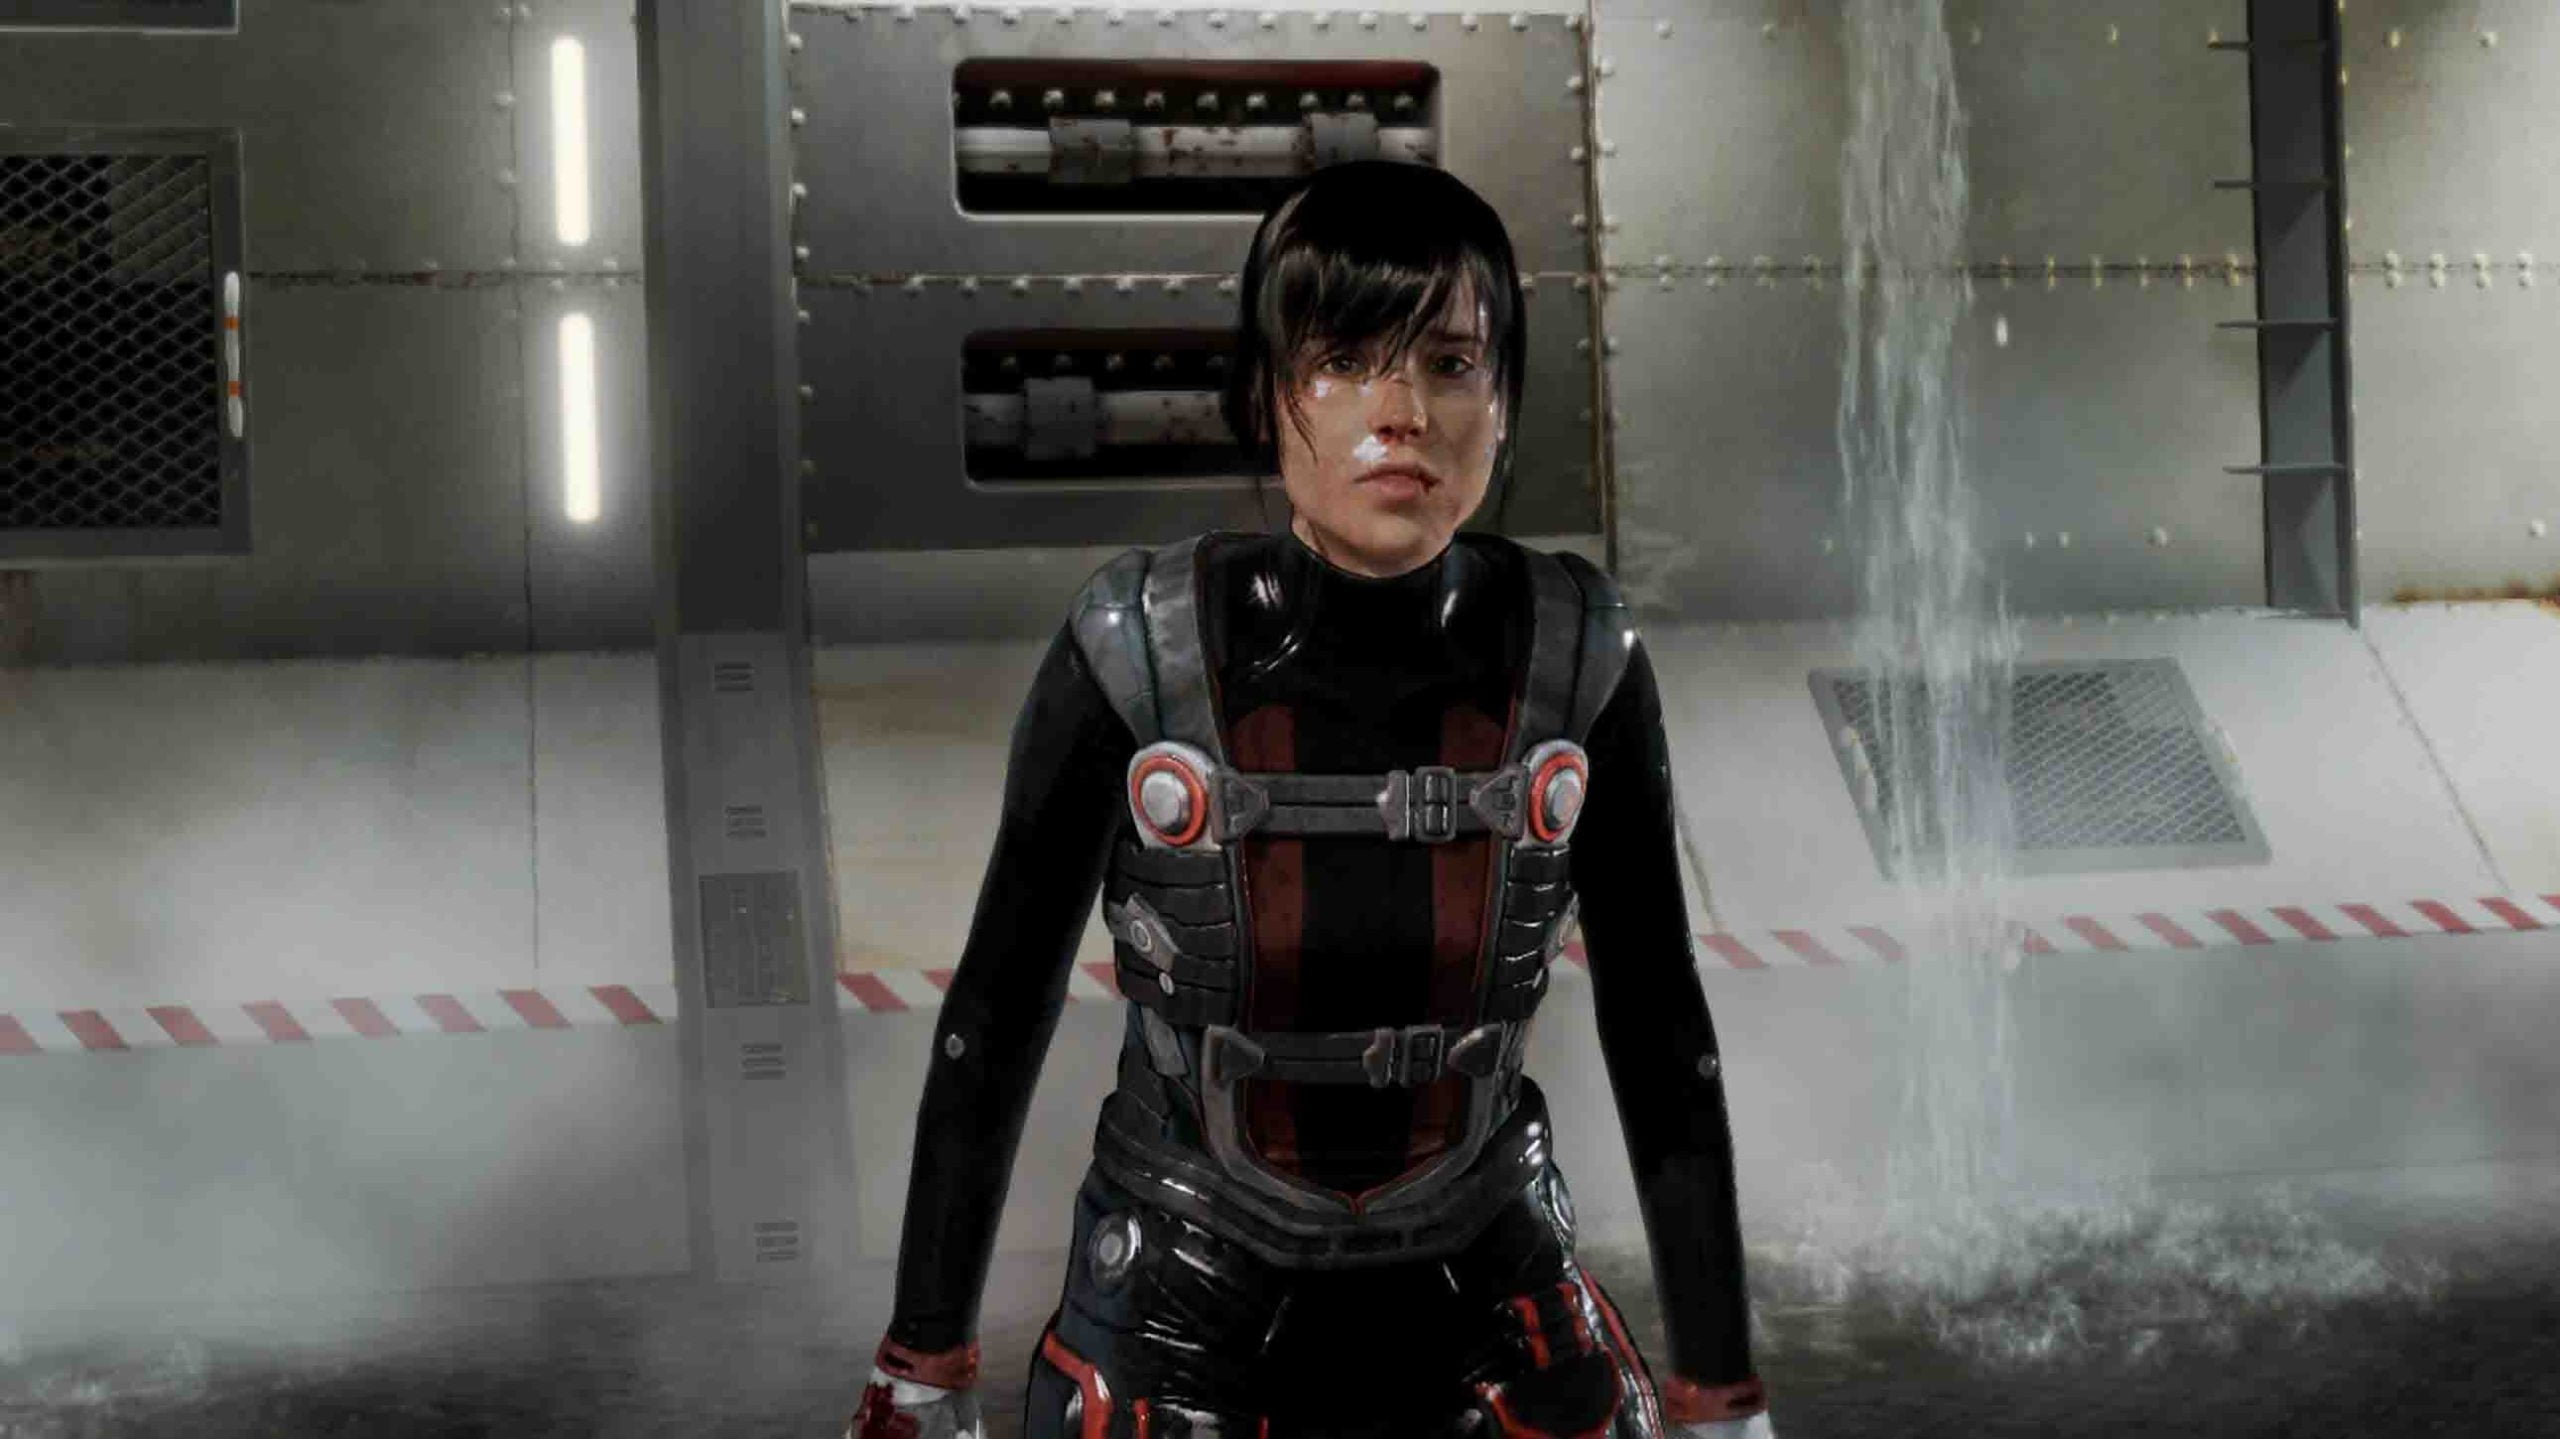 Beyond: Two Souls System Requirements for PC Games minimum, recommended specifications for Windows, CPU, OS, Processor, RAM Memory, Storage, and GPU.